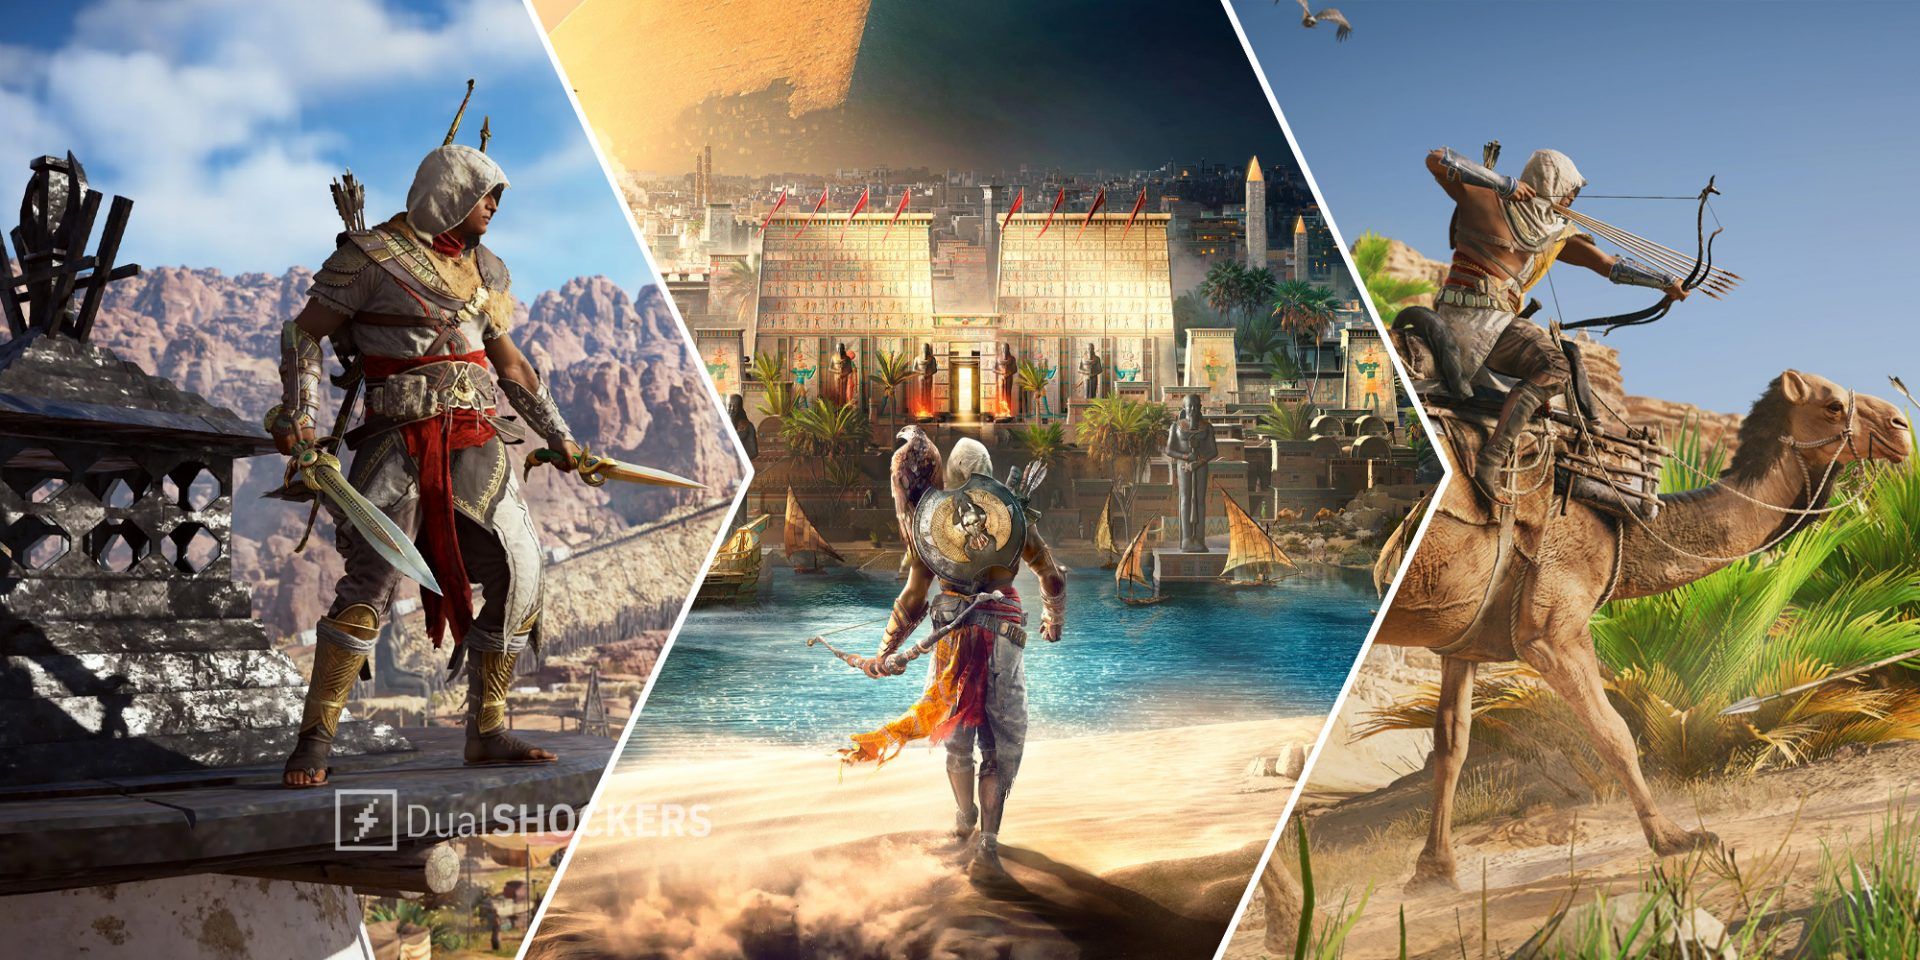 Assassin's Creed Origins Bayek standing on a building with his dual weapons on left, Bayek with his back turned and Egypt in front of him in middle, Bayek on a camel with his bow drawn while attacking enemies on right